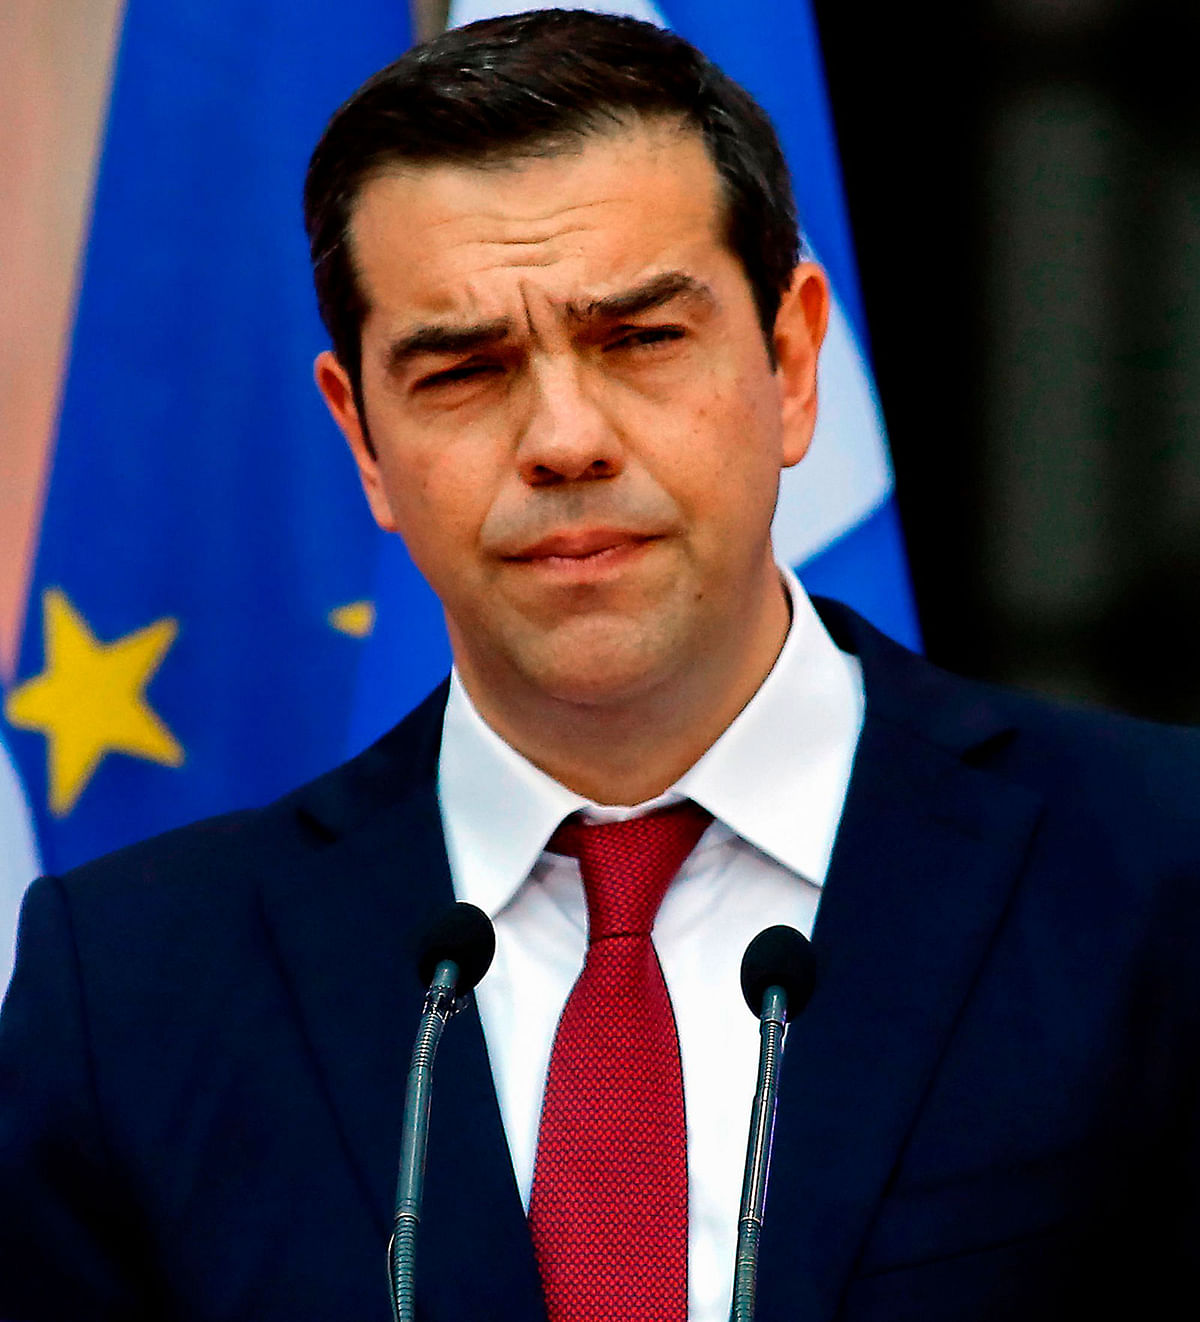 Greek prime minister Alexis Tsipras, wearing a tie, addresses the parliamentary group of leftist Syriza and coalition partner Independent Greeks in Athens, on 22 June after Eurozone financial ministers have agreed to complete the eight-year bailout program for Greece. Photo: AFP